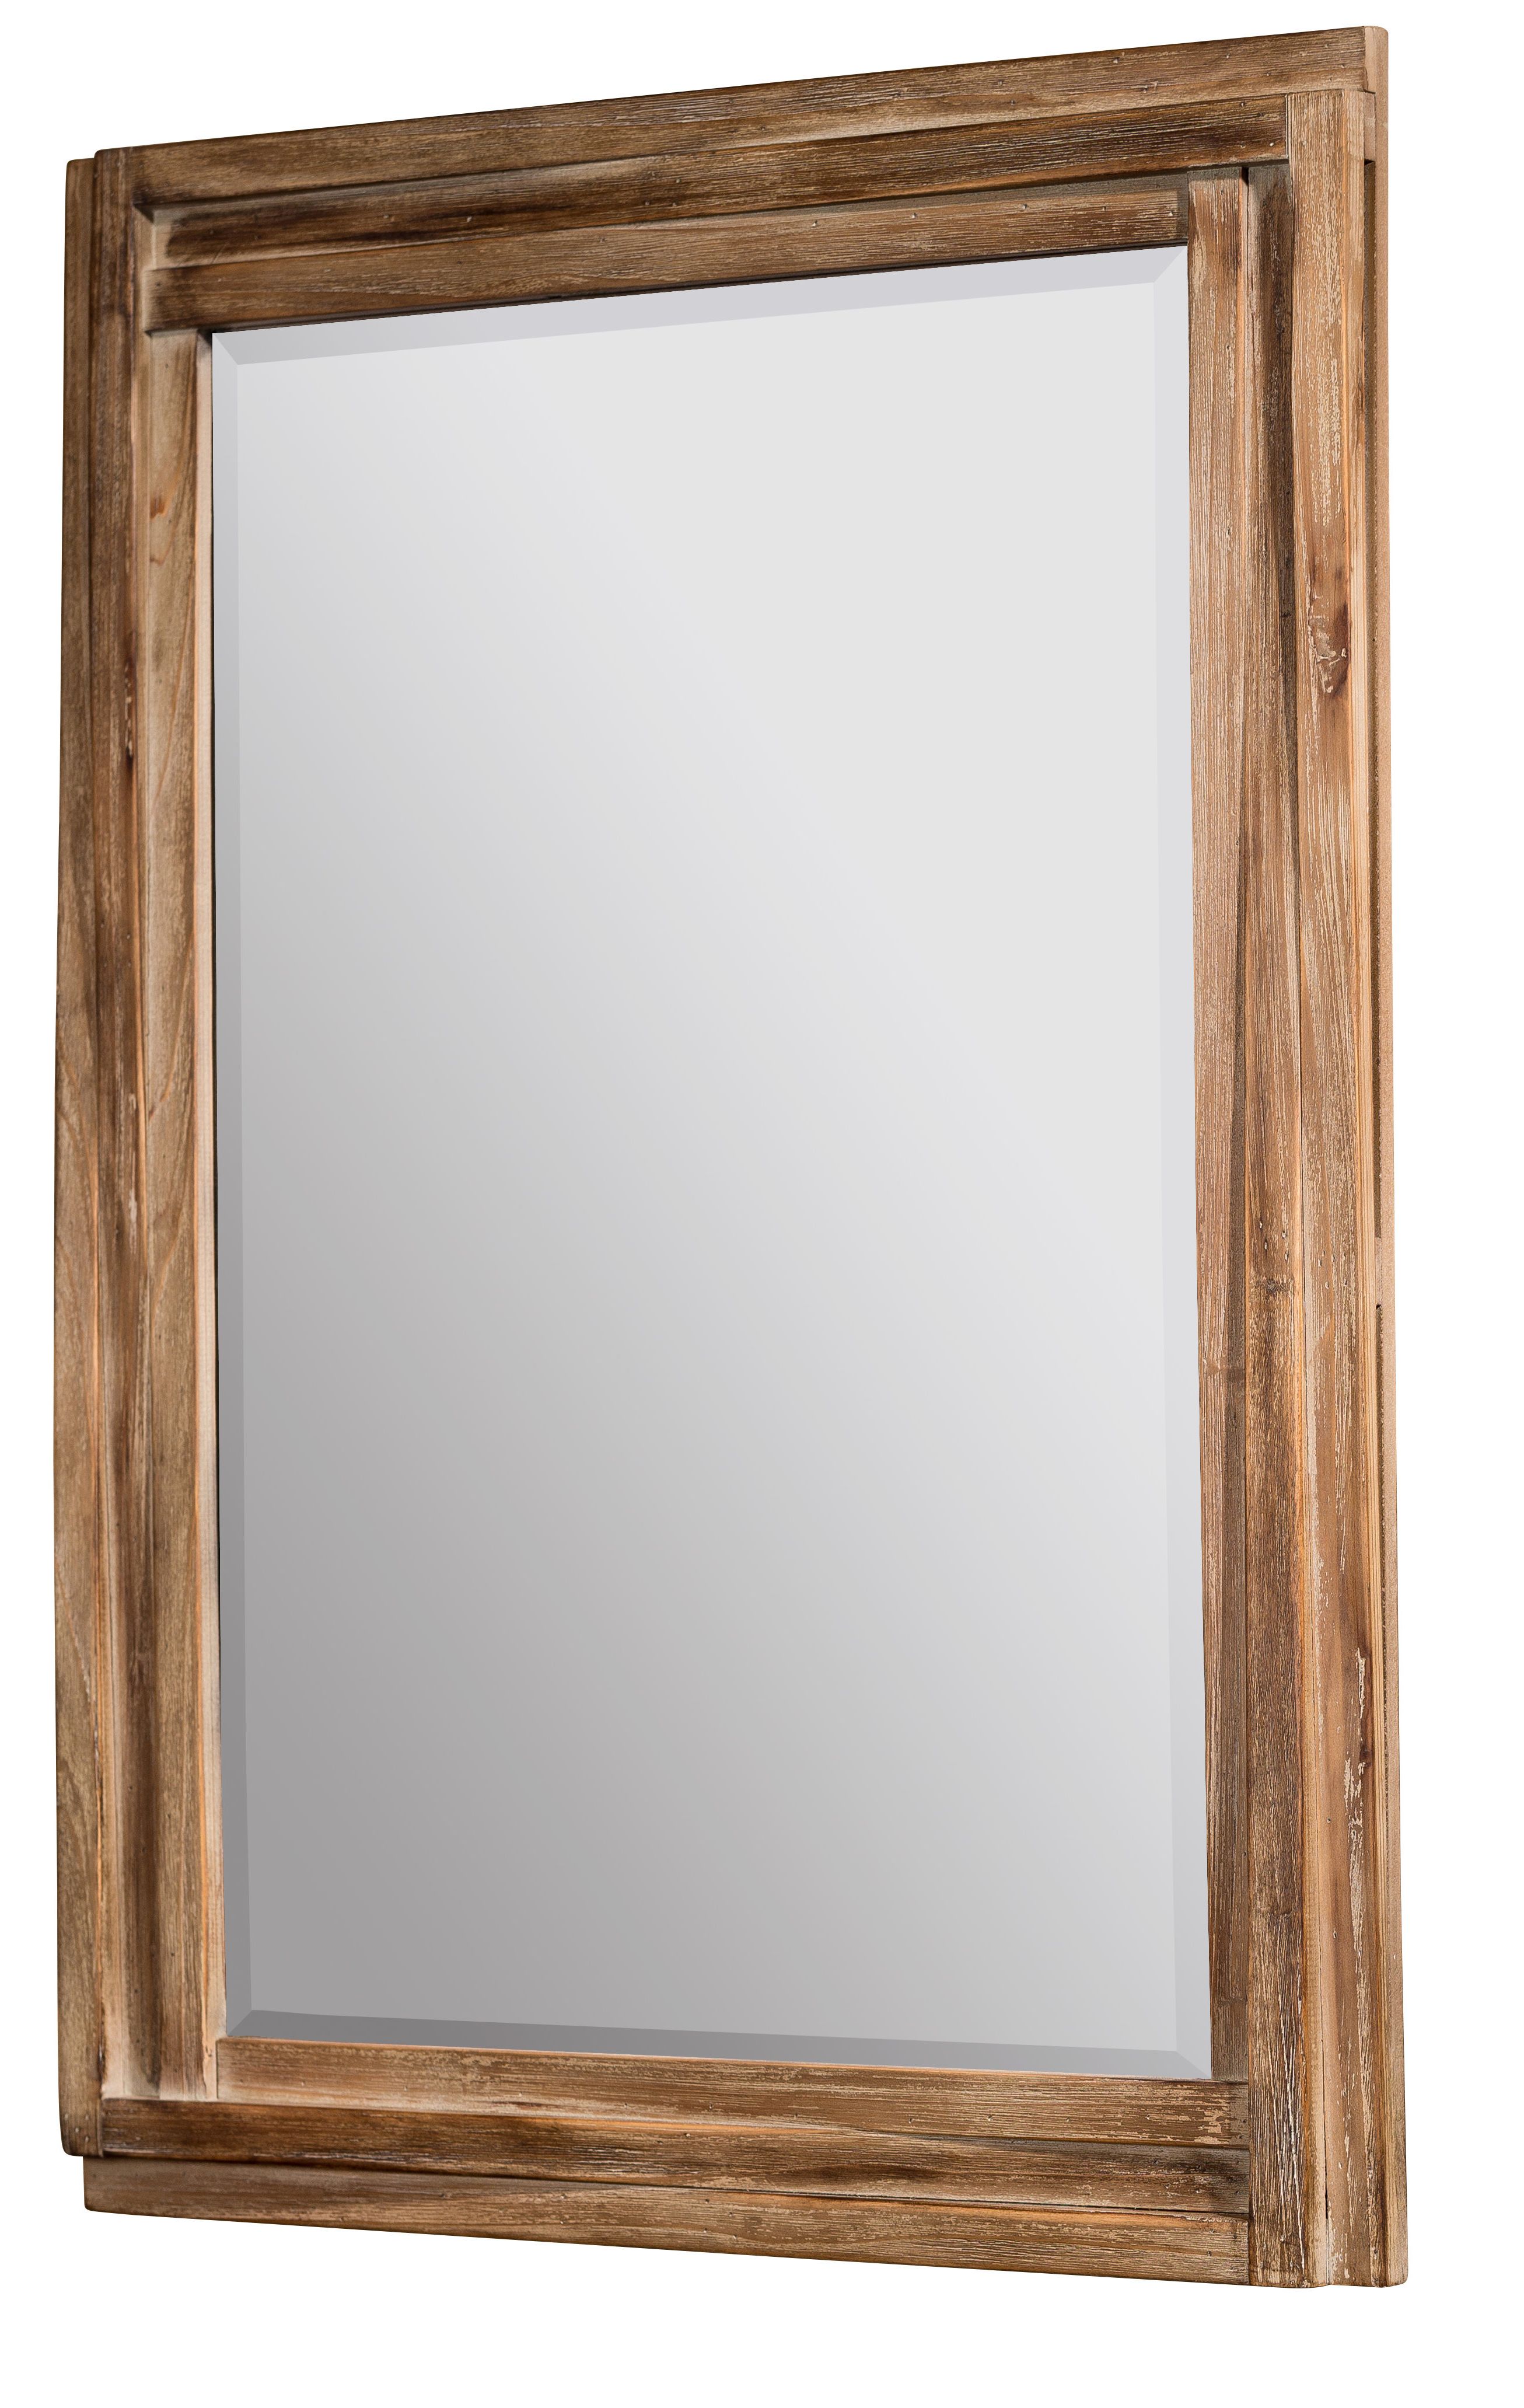 Well Liked Jaylene Wall Mirror Intended For Tifton Traditional Beveled Accent Mirrors (View 7 of 20)